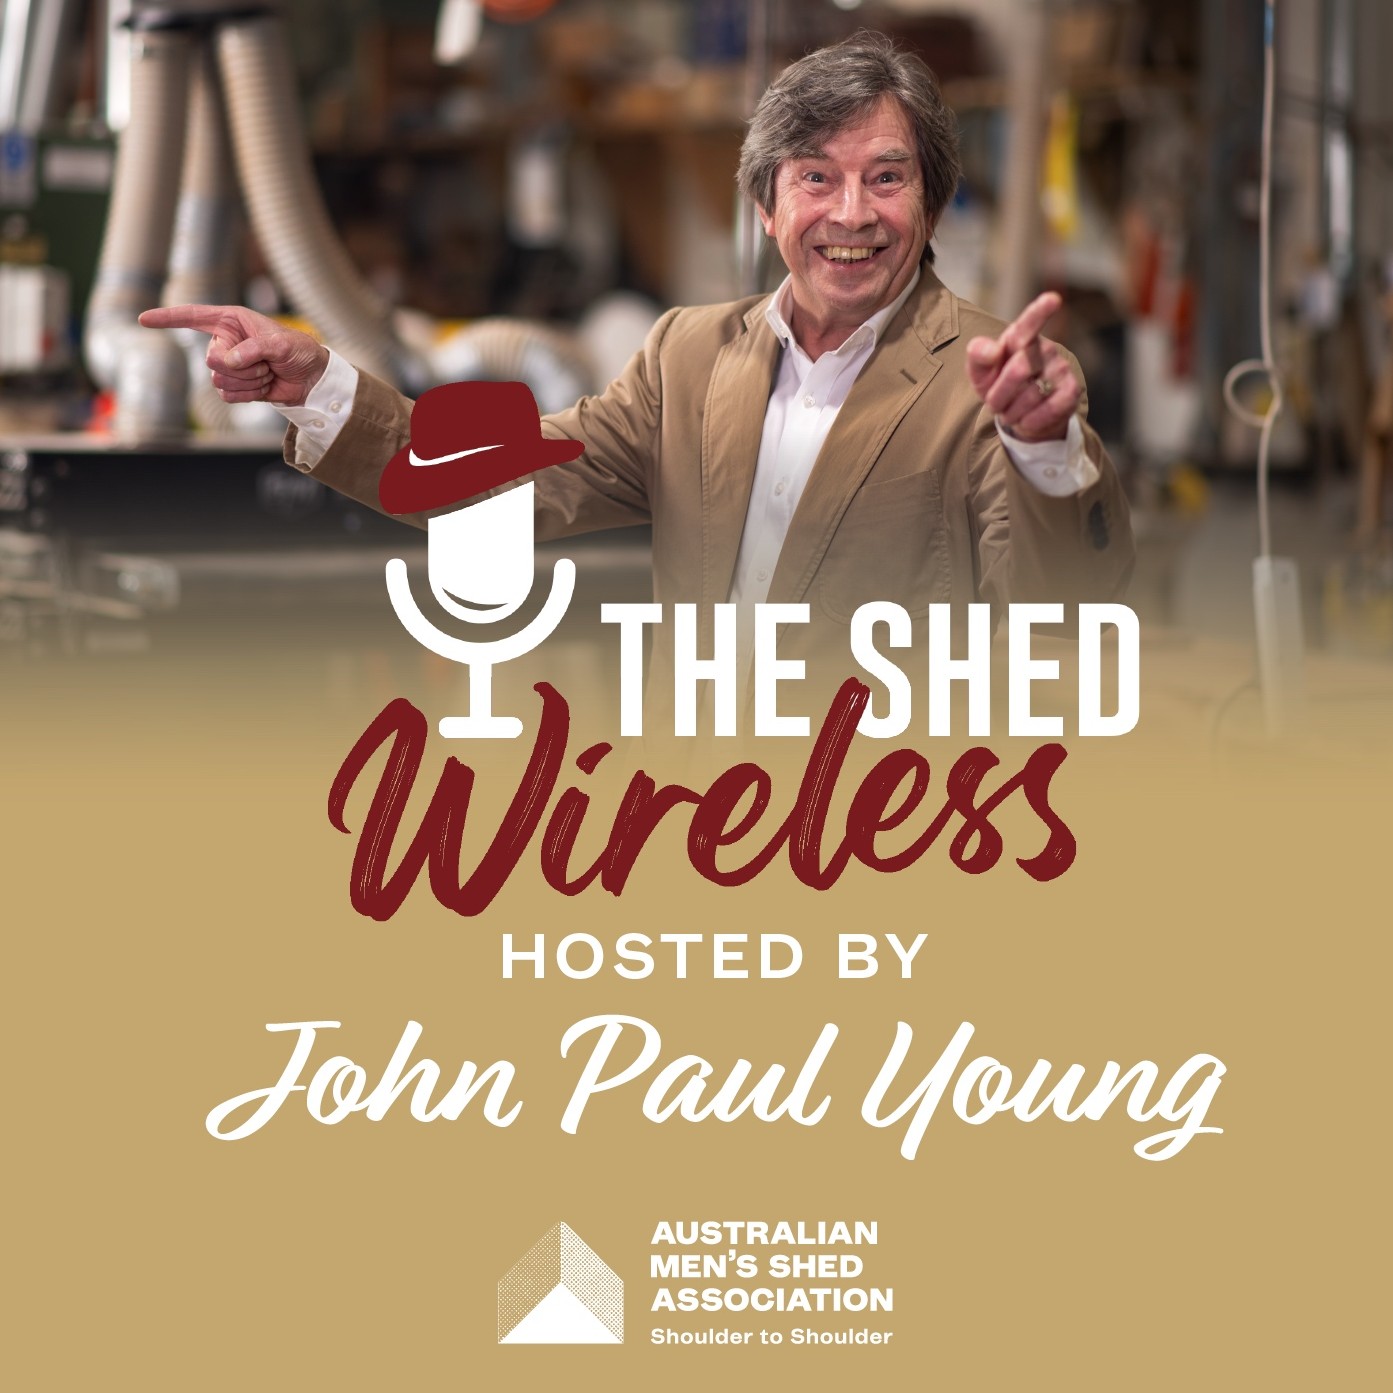 the shed wireless